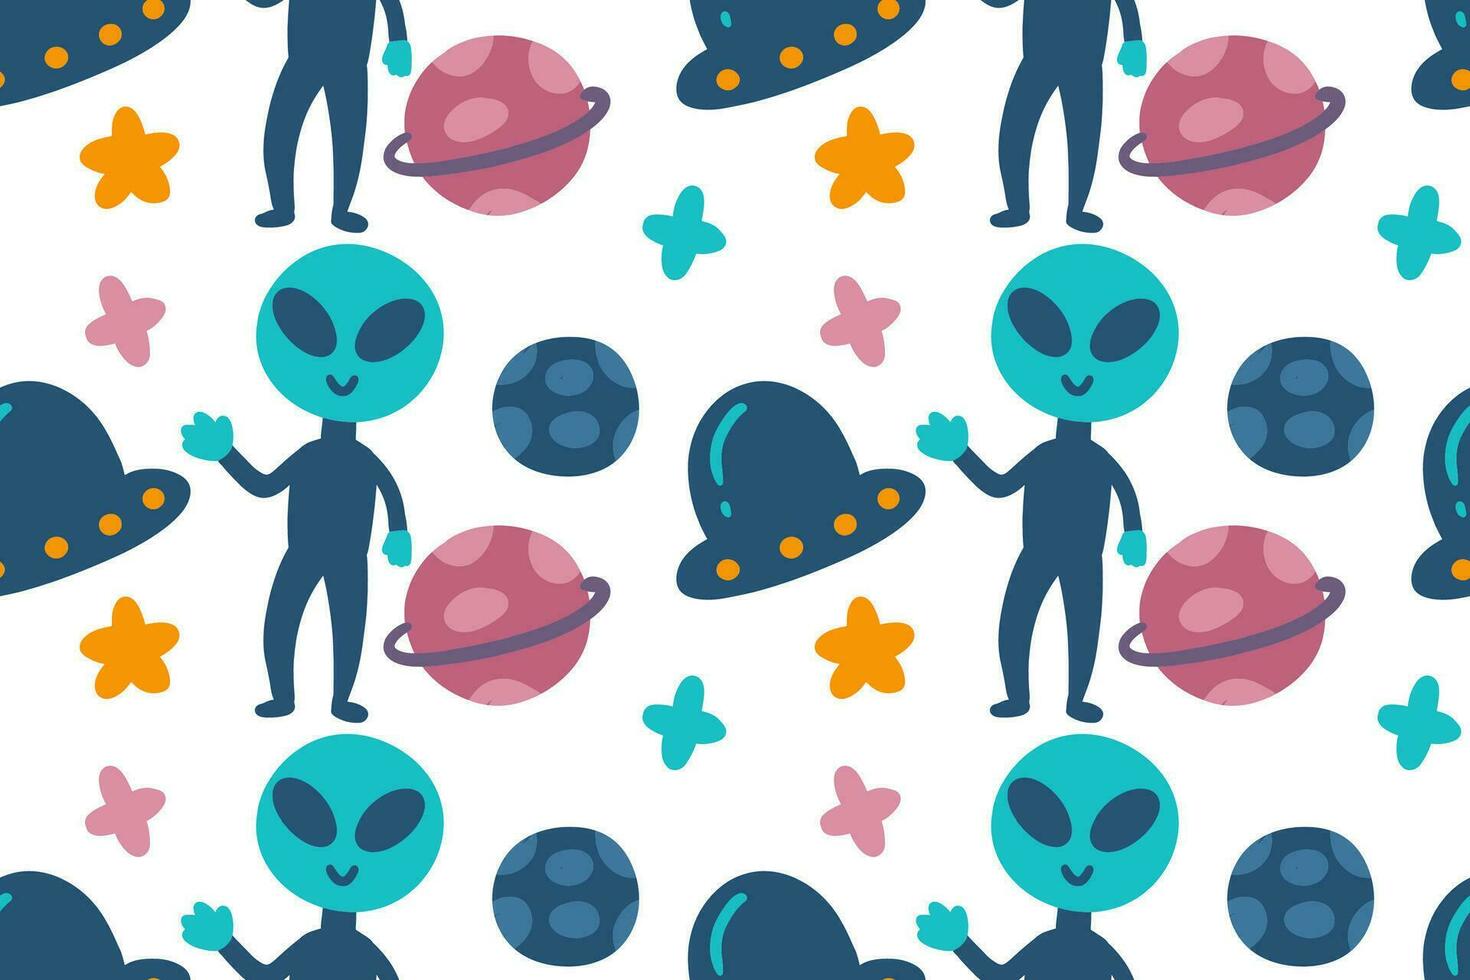 Hand drawn funny alien, ufo, planets and stars cartoon illustration seamless pattern vector